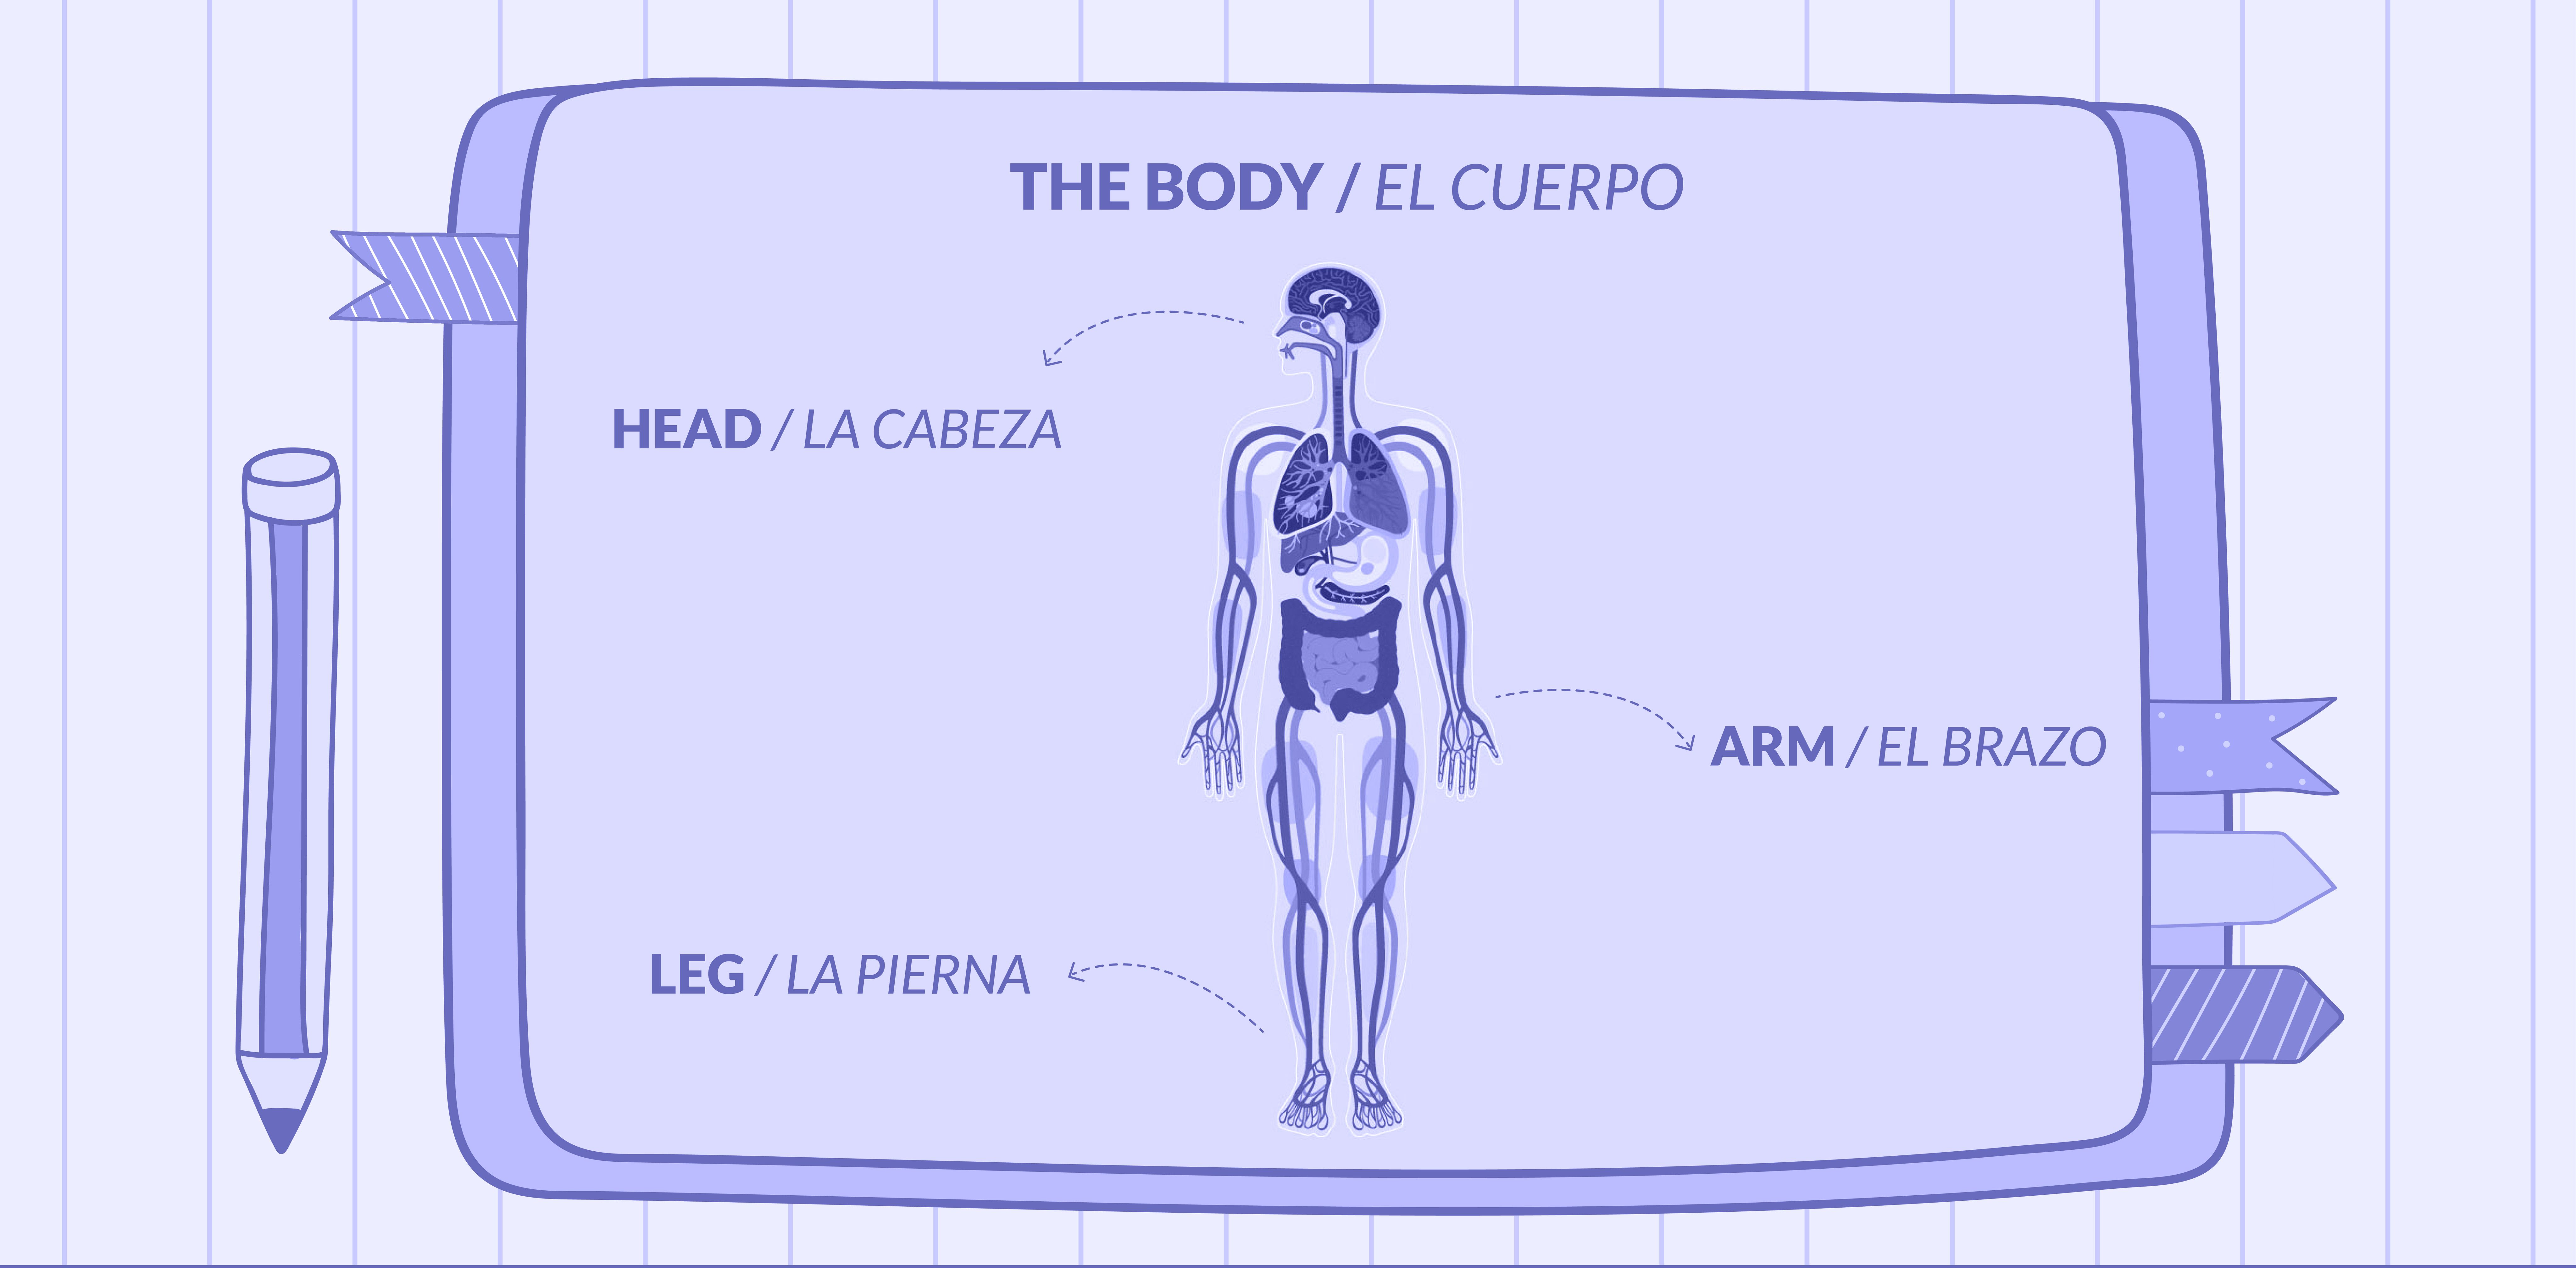 A picture of a human body with Spanish and English names for some of the body parts.